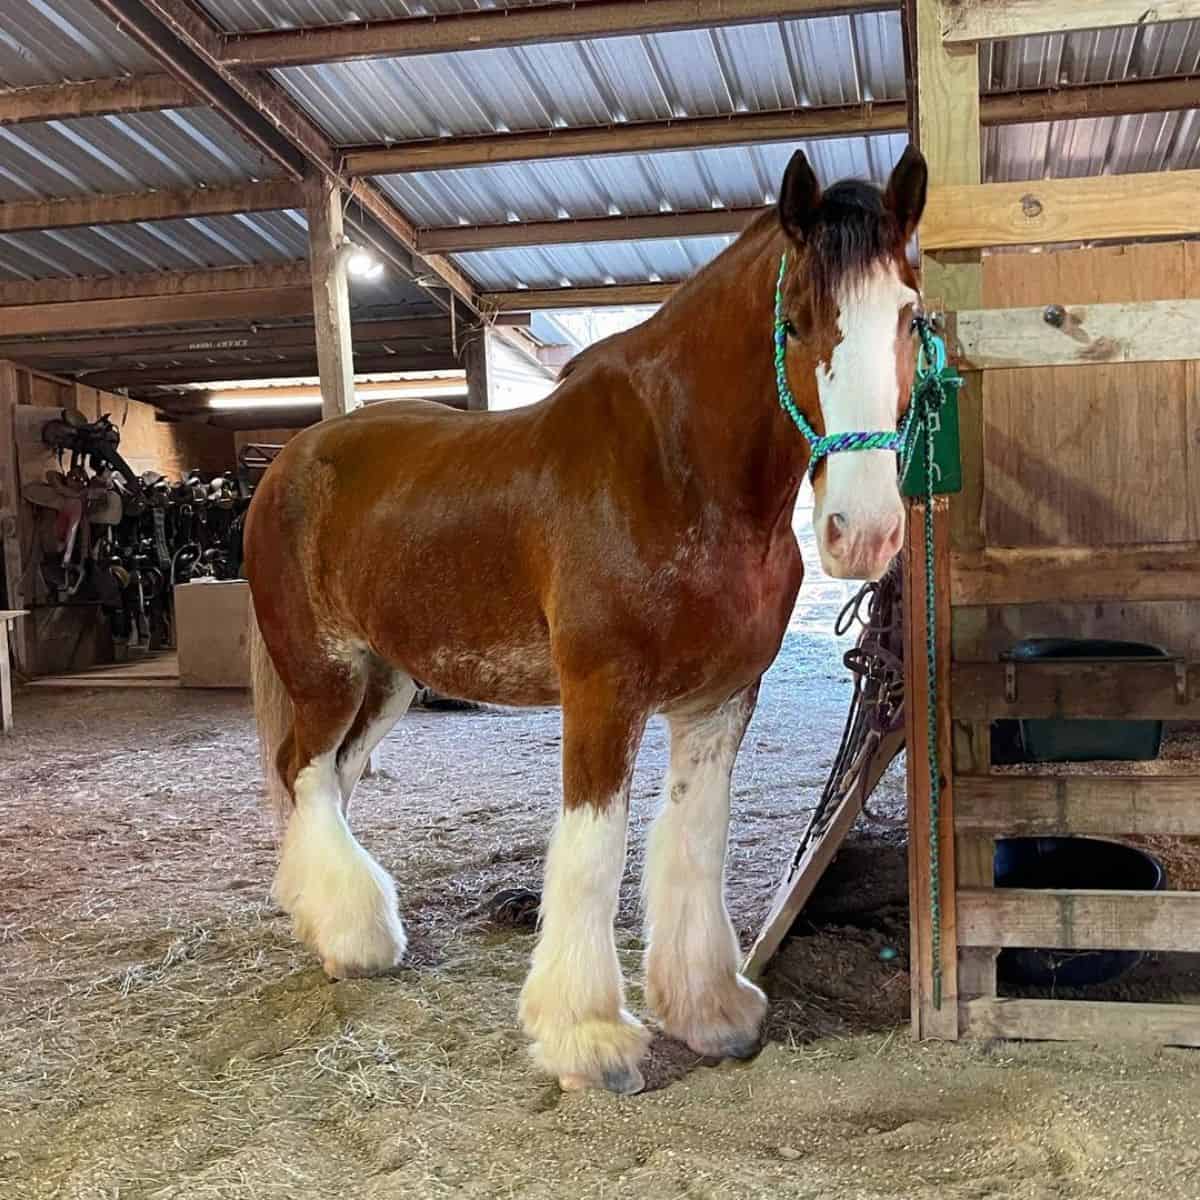 A huge brown Clydesdale horse stands in a stable.